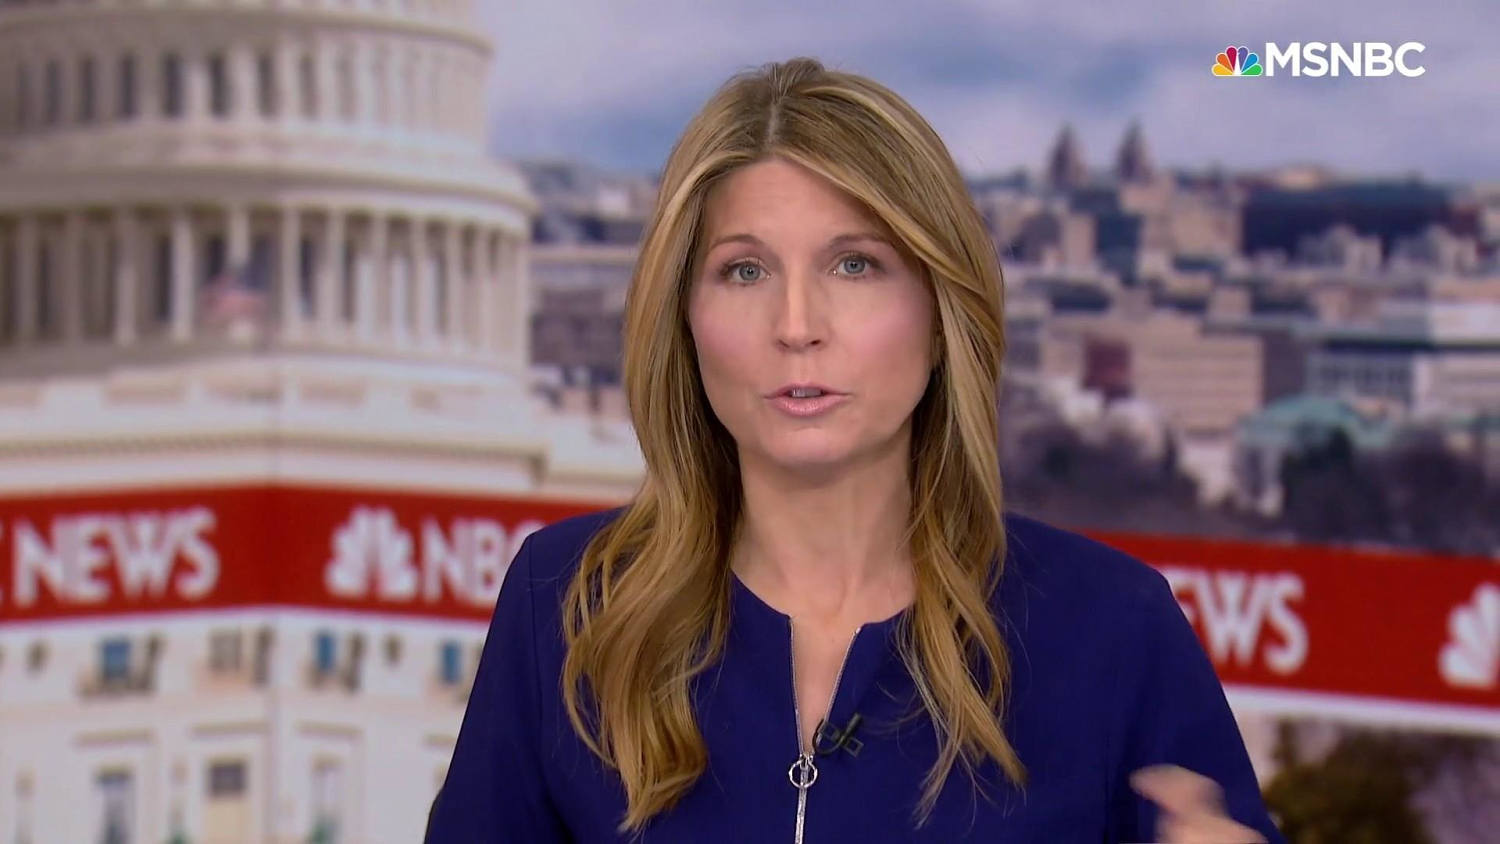 Nicole Wallace on MSNBC: Where to Find Her? 6